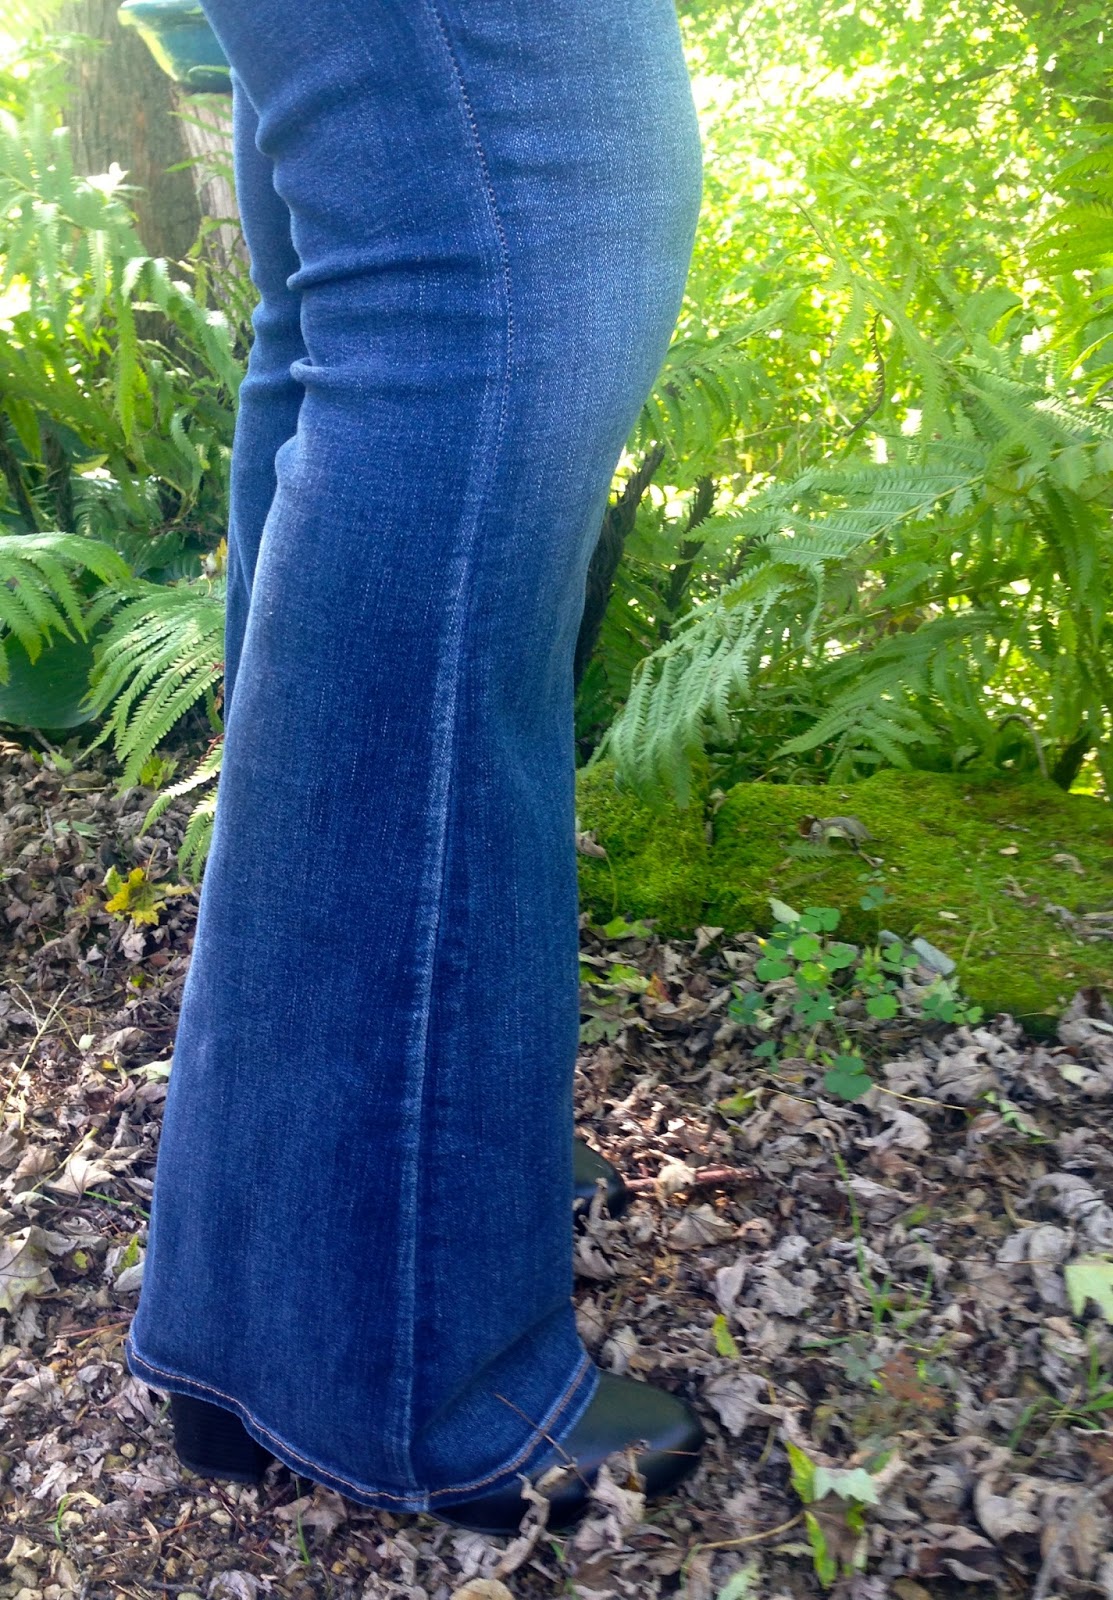 Amy's Creative Pursuits: Fashion Over Fifty: Wearing My Flares